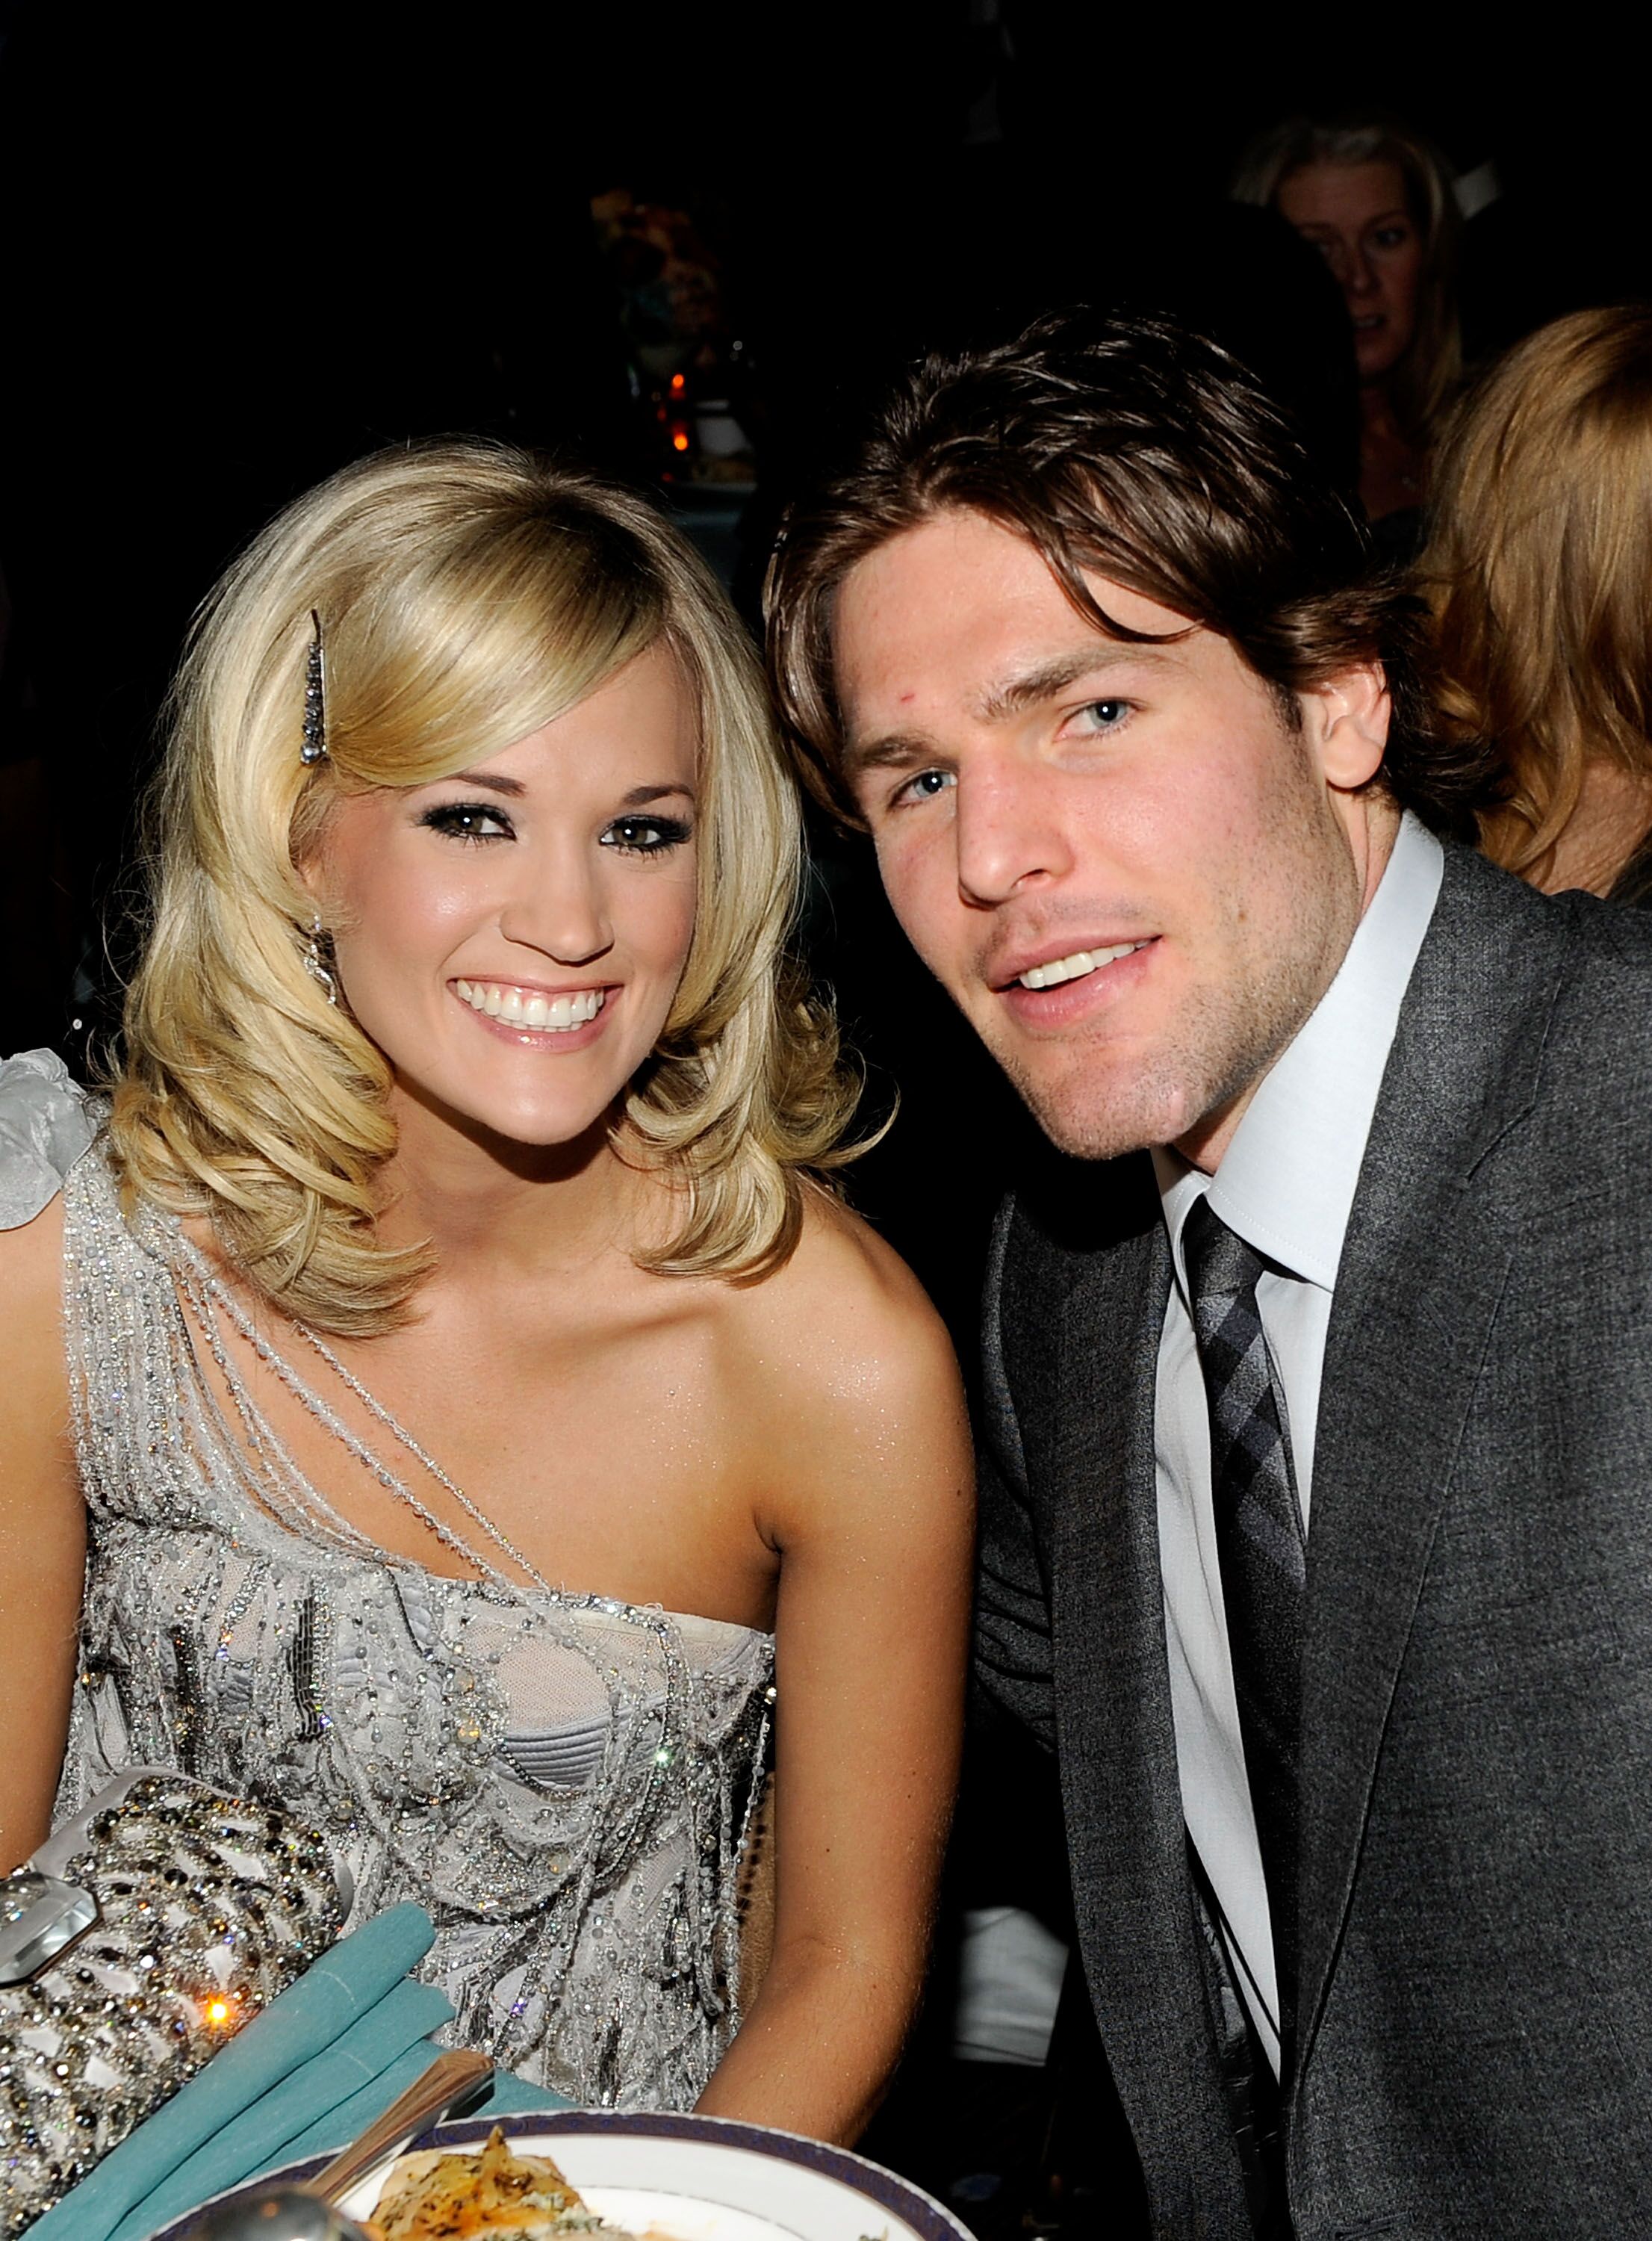 Carrie Underwood and Mike Fisher during the 52nd Annual GRAMMY Awards. | Source: Getty Images